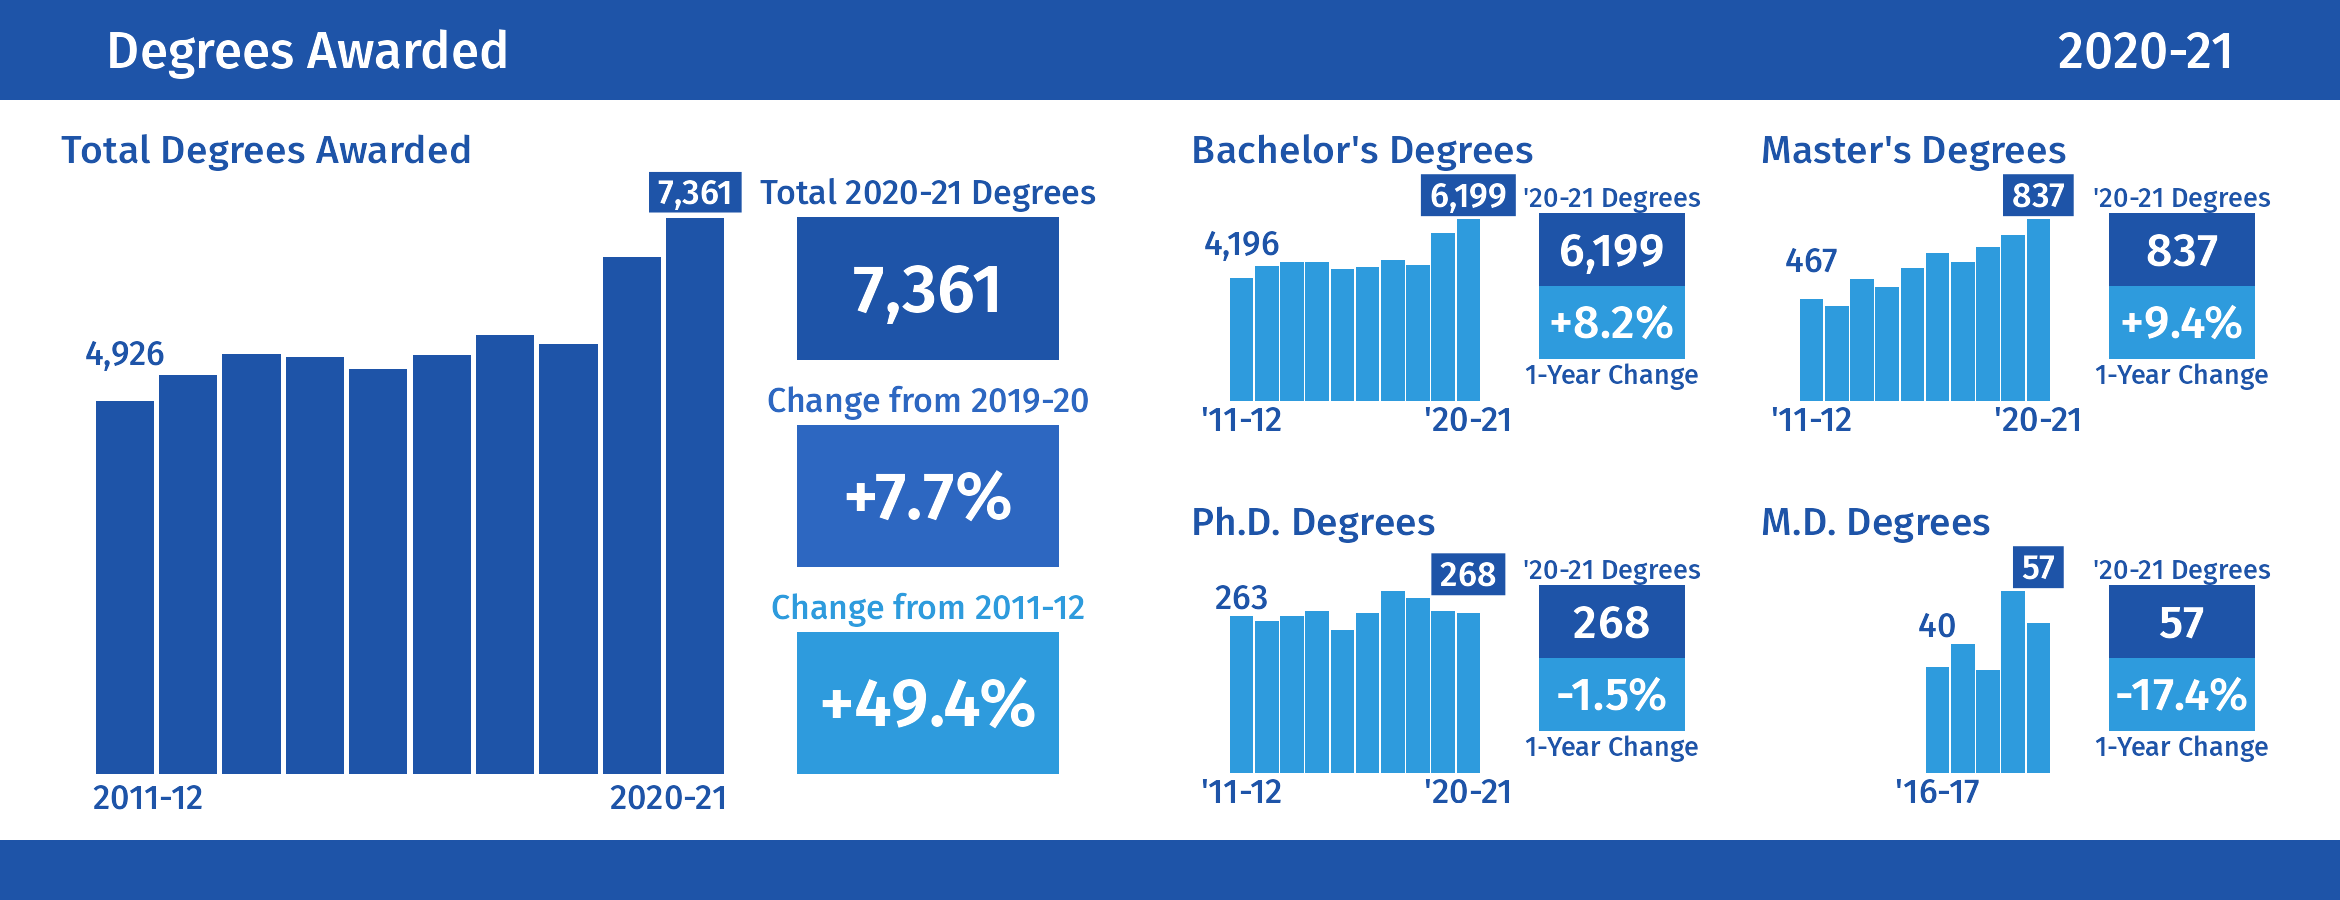 Degrees Awarded: For additional details, click to view our Degrees Awarded dashboard.